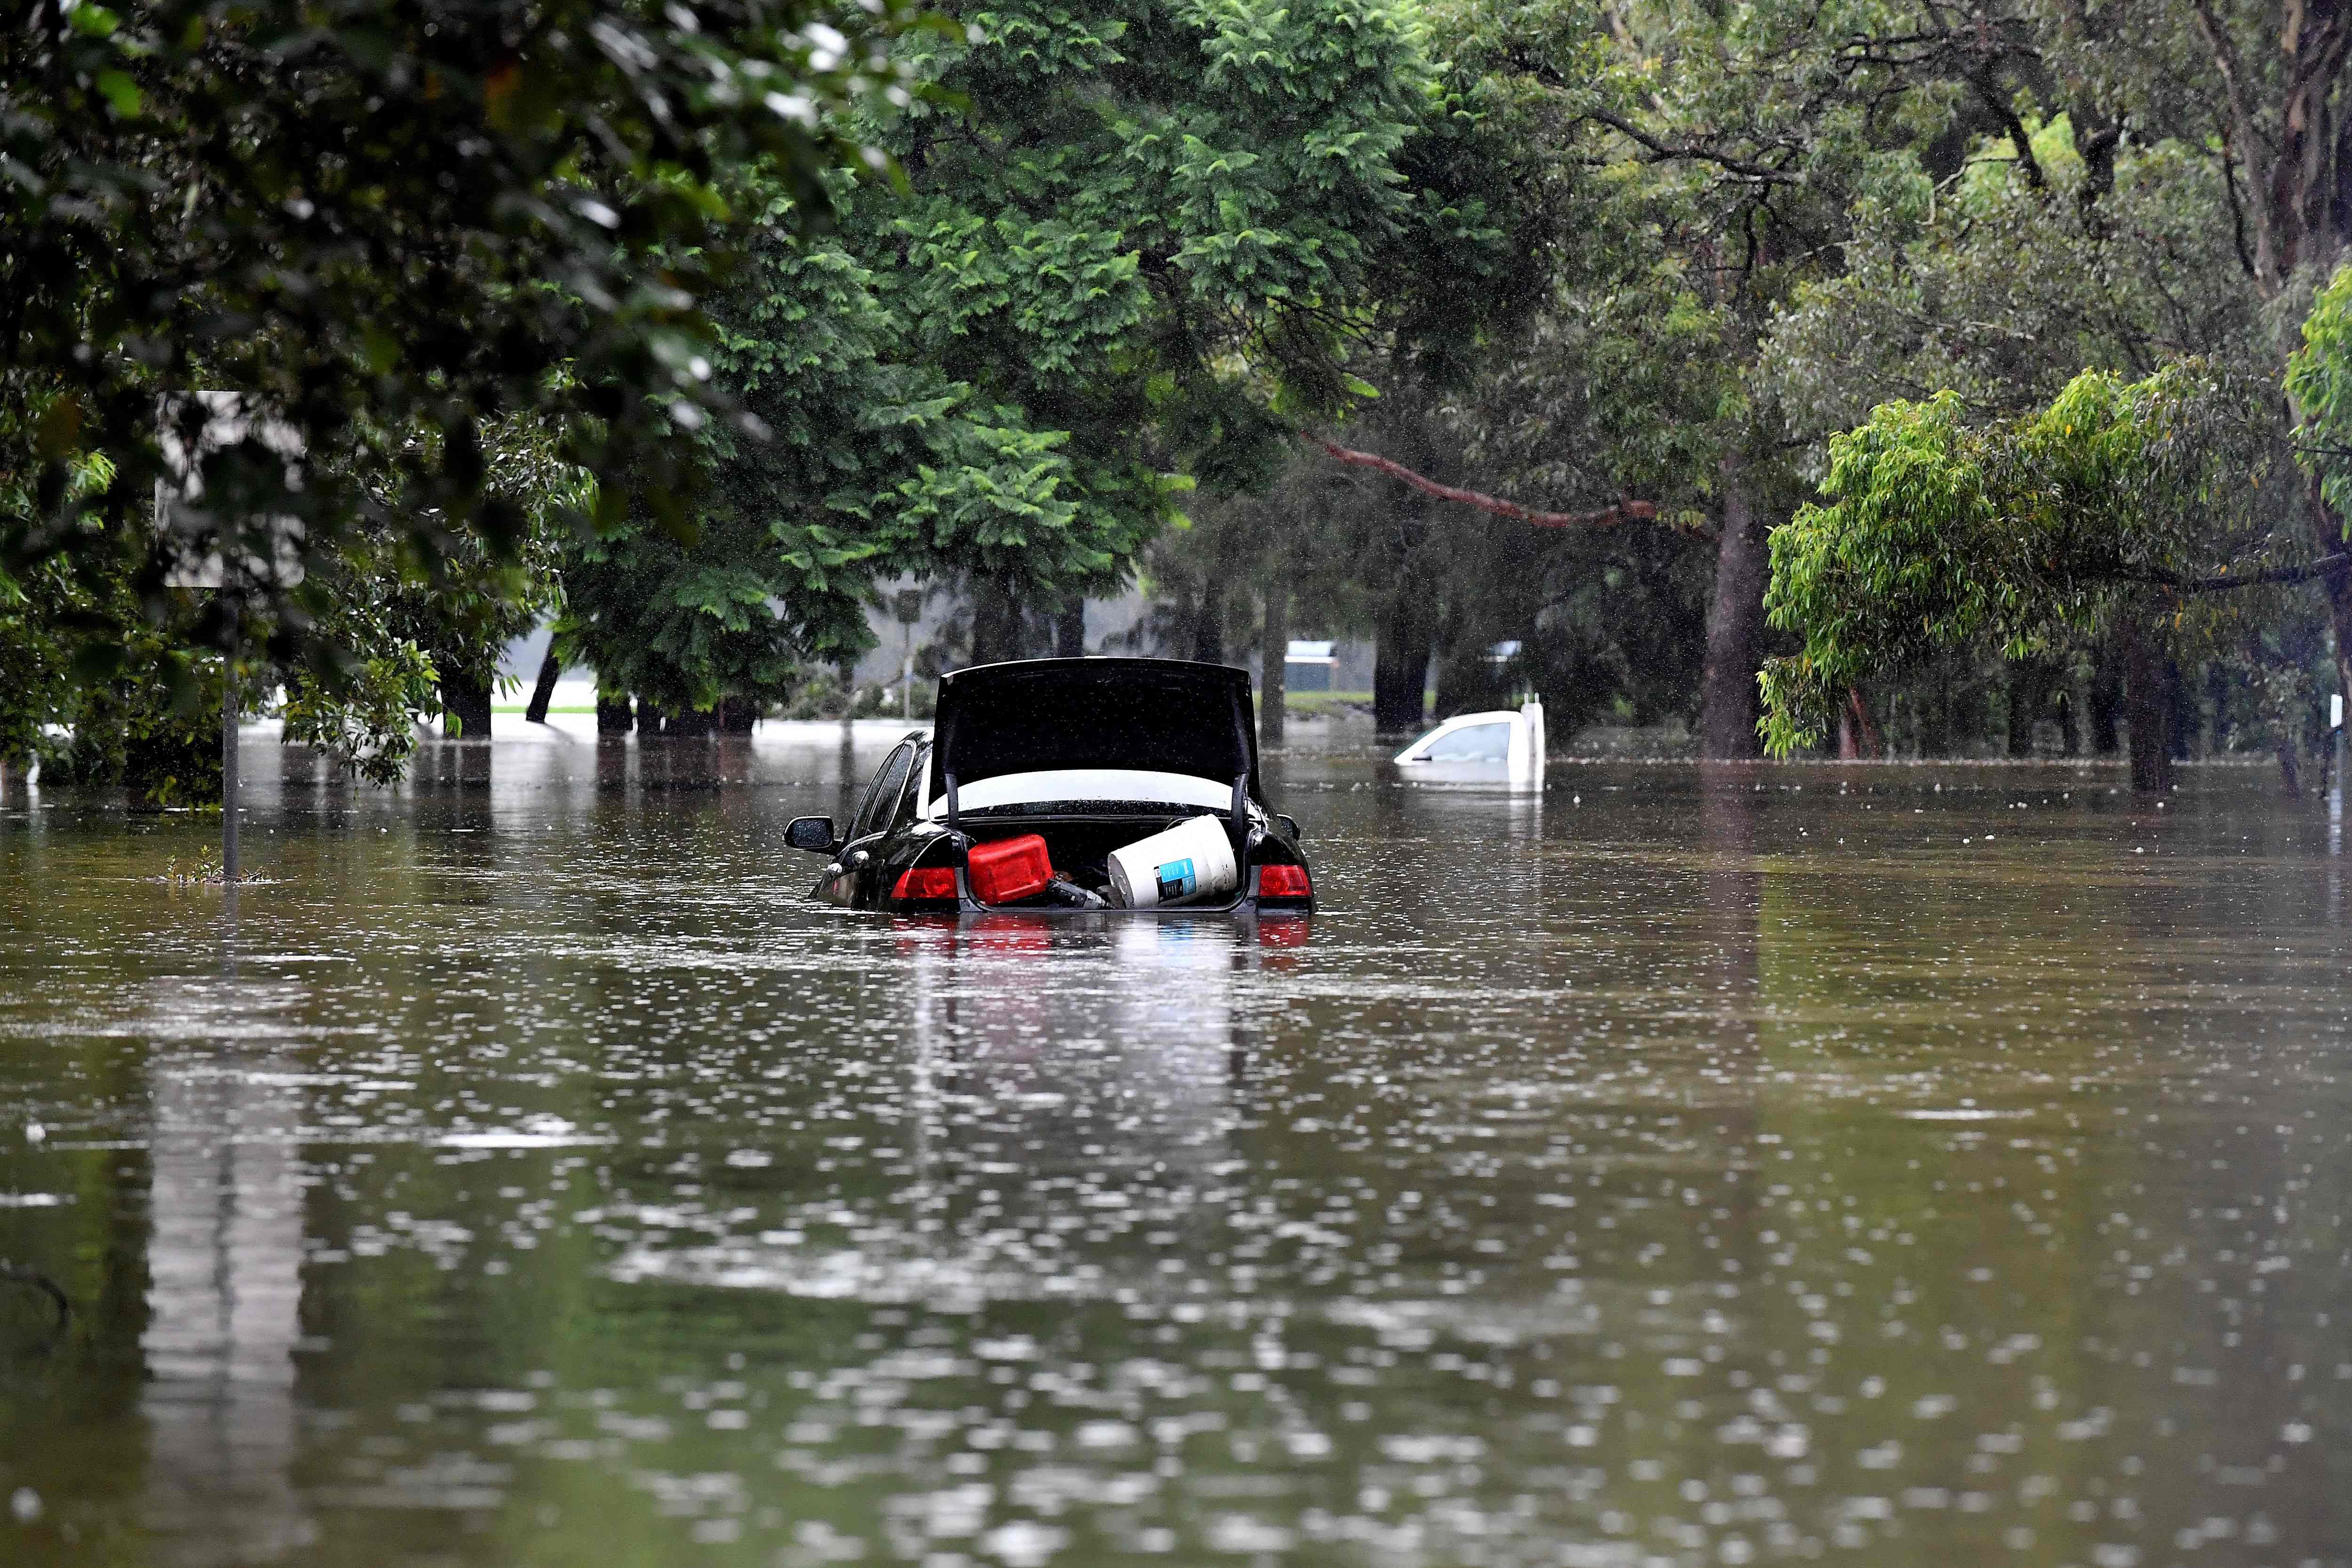 Cars were stranded in floodwaters in the southwestern suburb of Sydney.  (Photo: Muhammad FAROOQ / AFP)